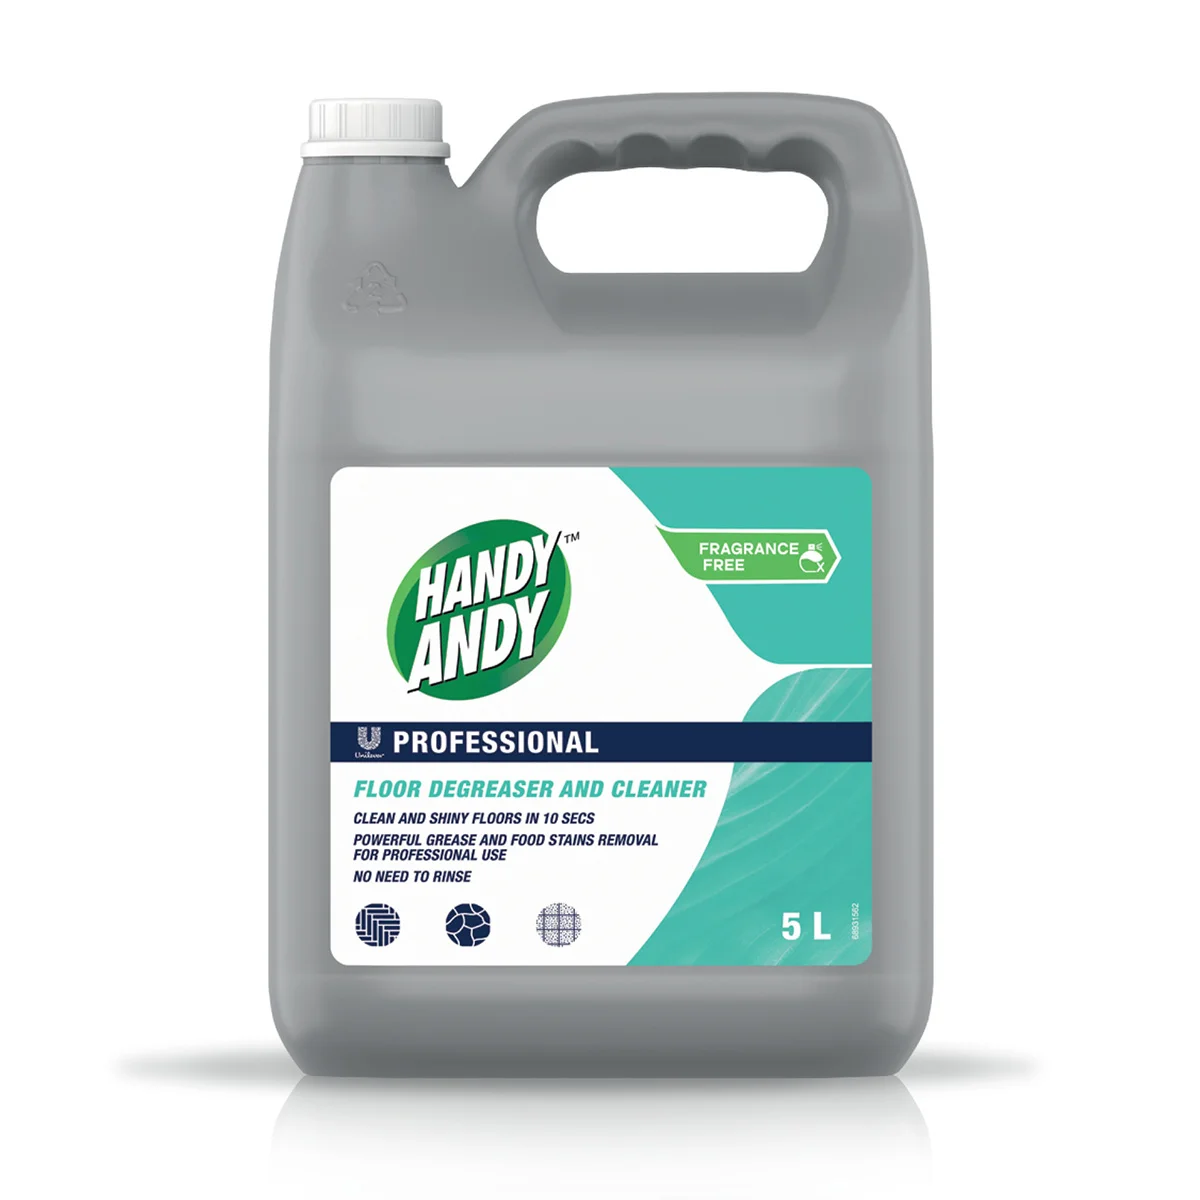 Handy Andy Professional Floor Degreaser and Cleaner